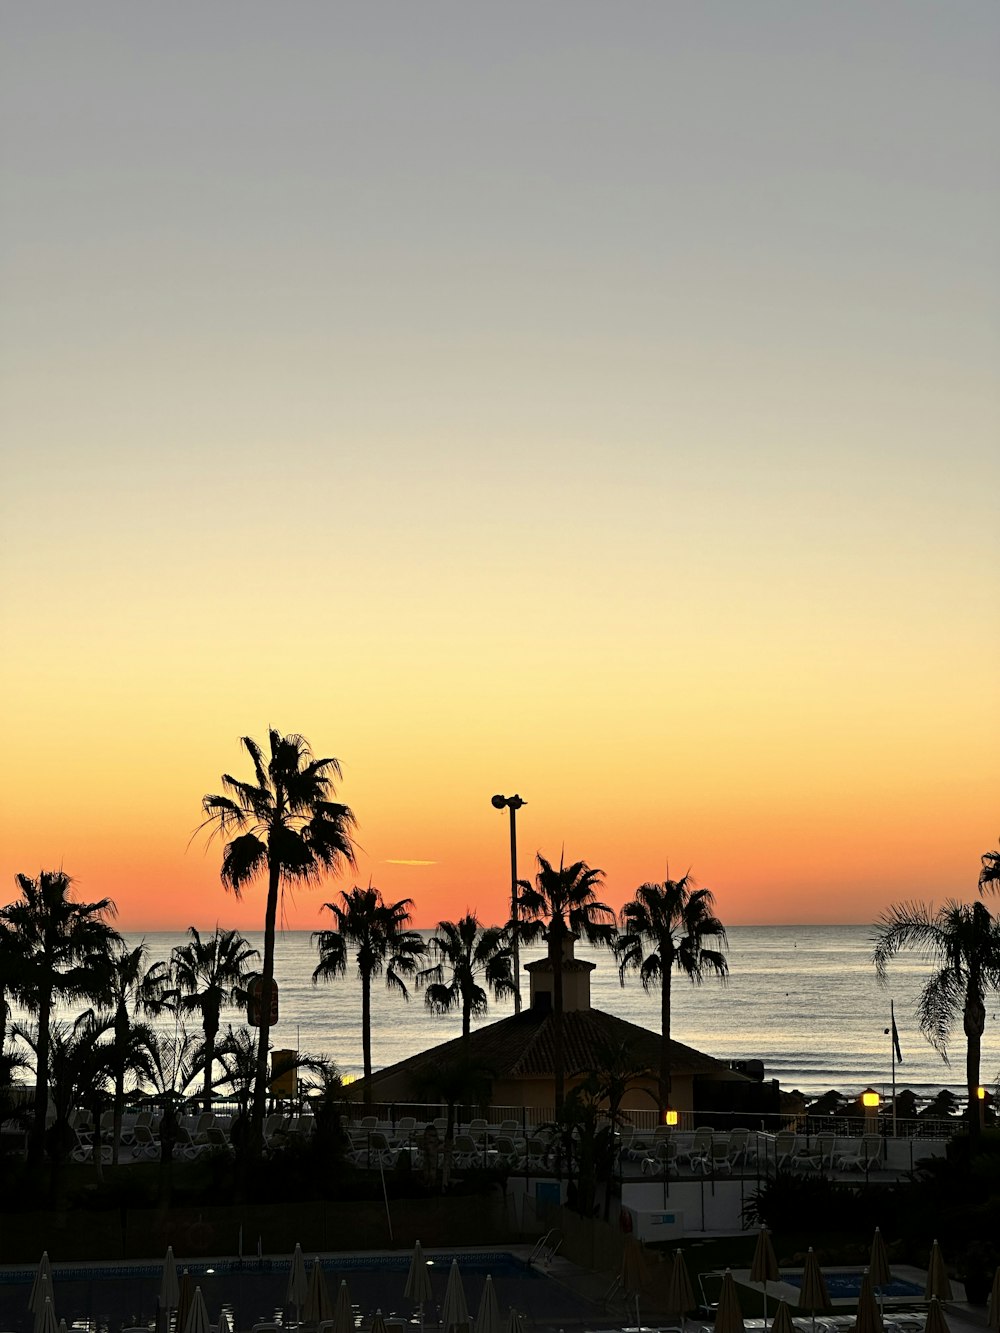 a sunset view of a beach with palm trees